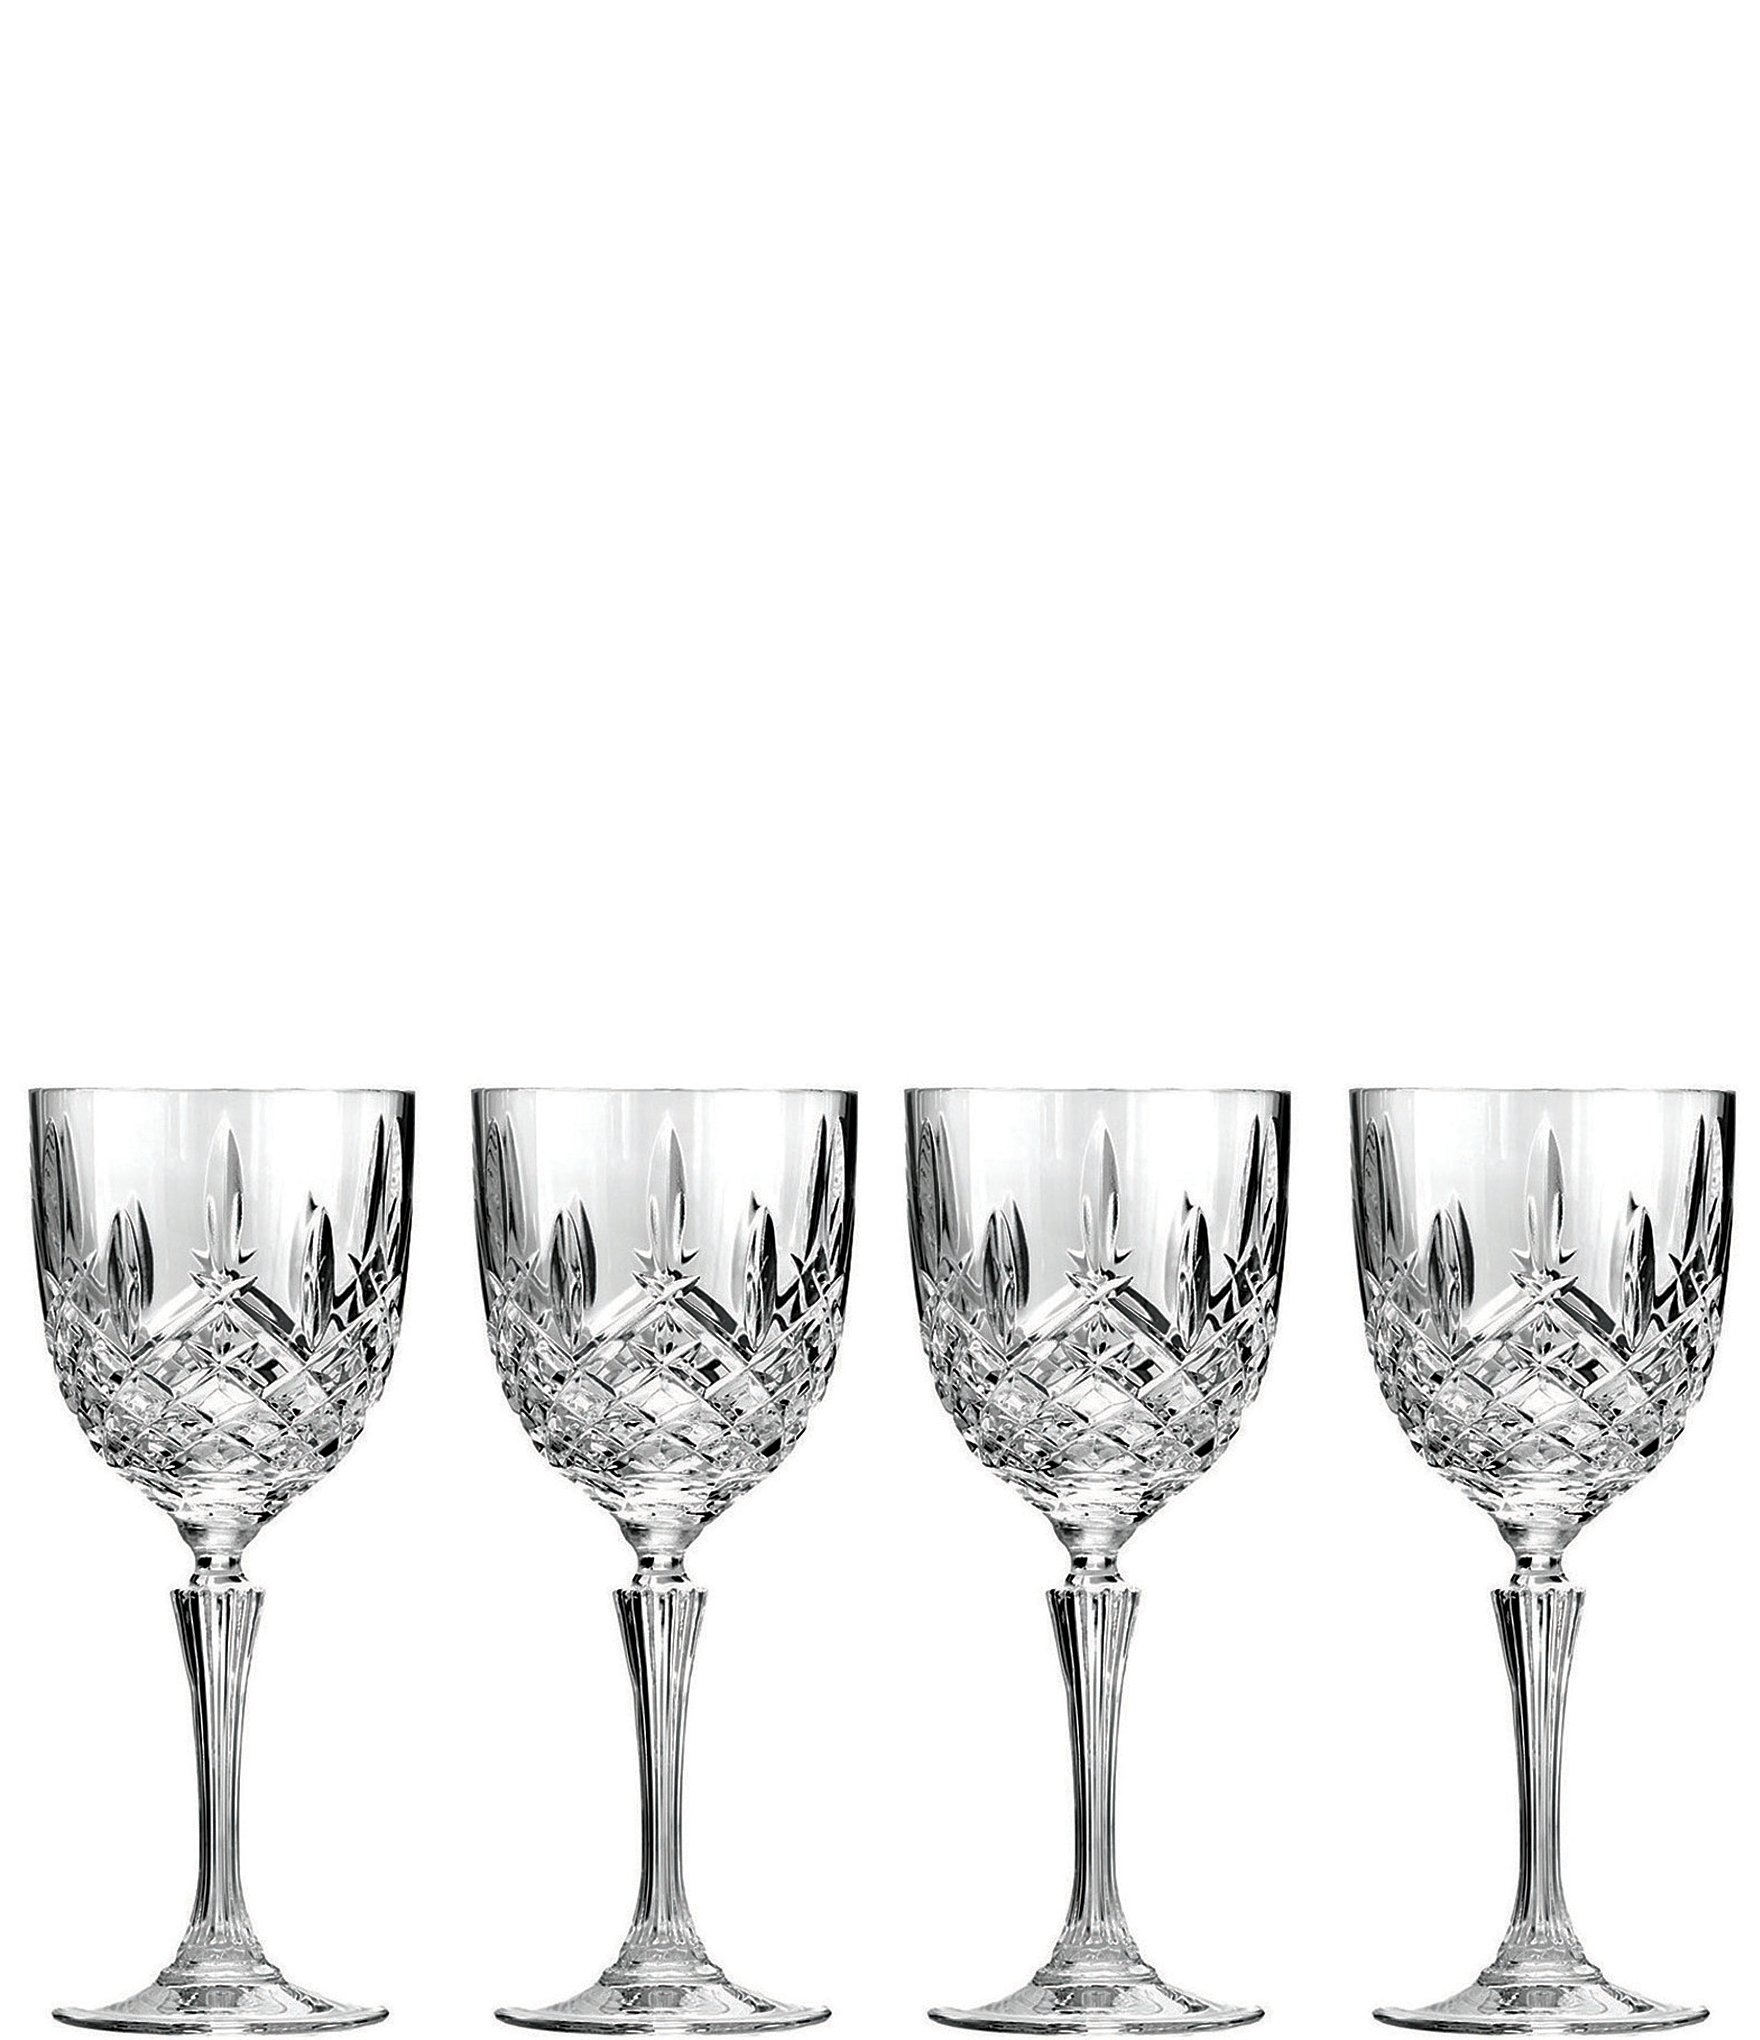 https://dimg.dillards.com/is/image/DillardsZoom/zoom/marquis-by-waterford-markham-traditional-crystal-wine-glasses-set-of-4/00000000_zi_cc81a24e-485a-4f0f-83b4-4c604f4ce842.jpg